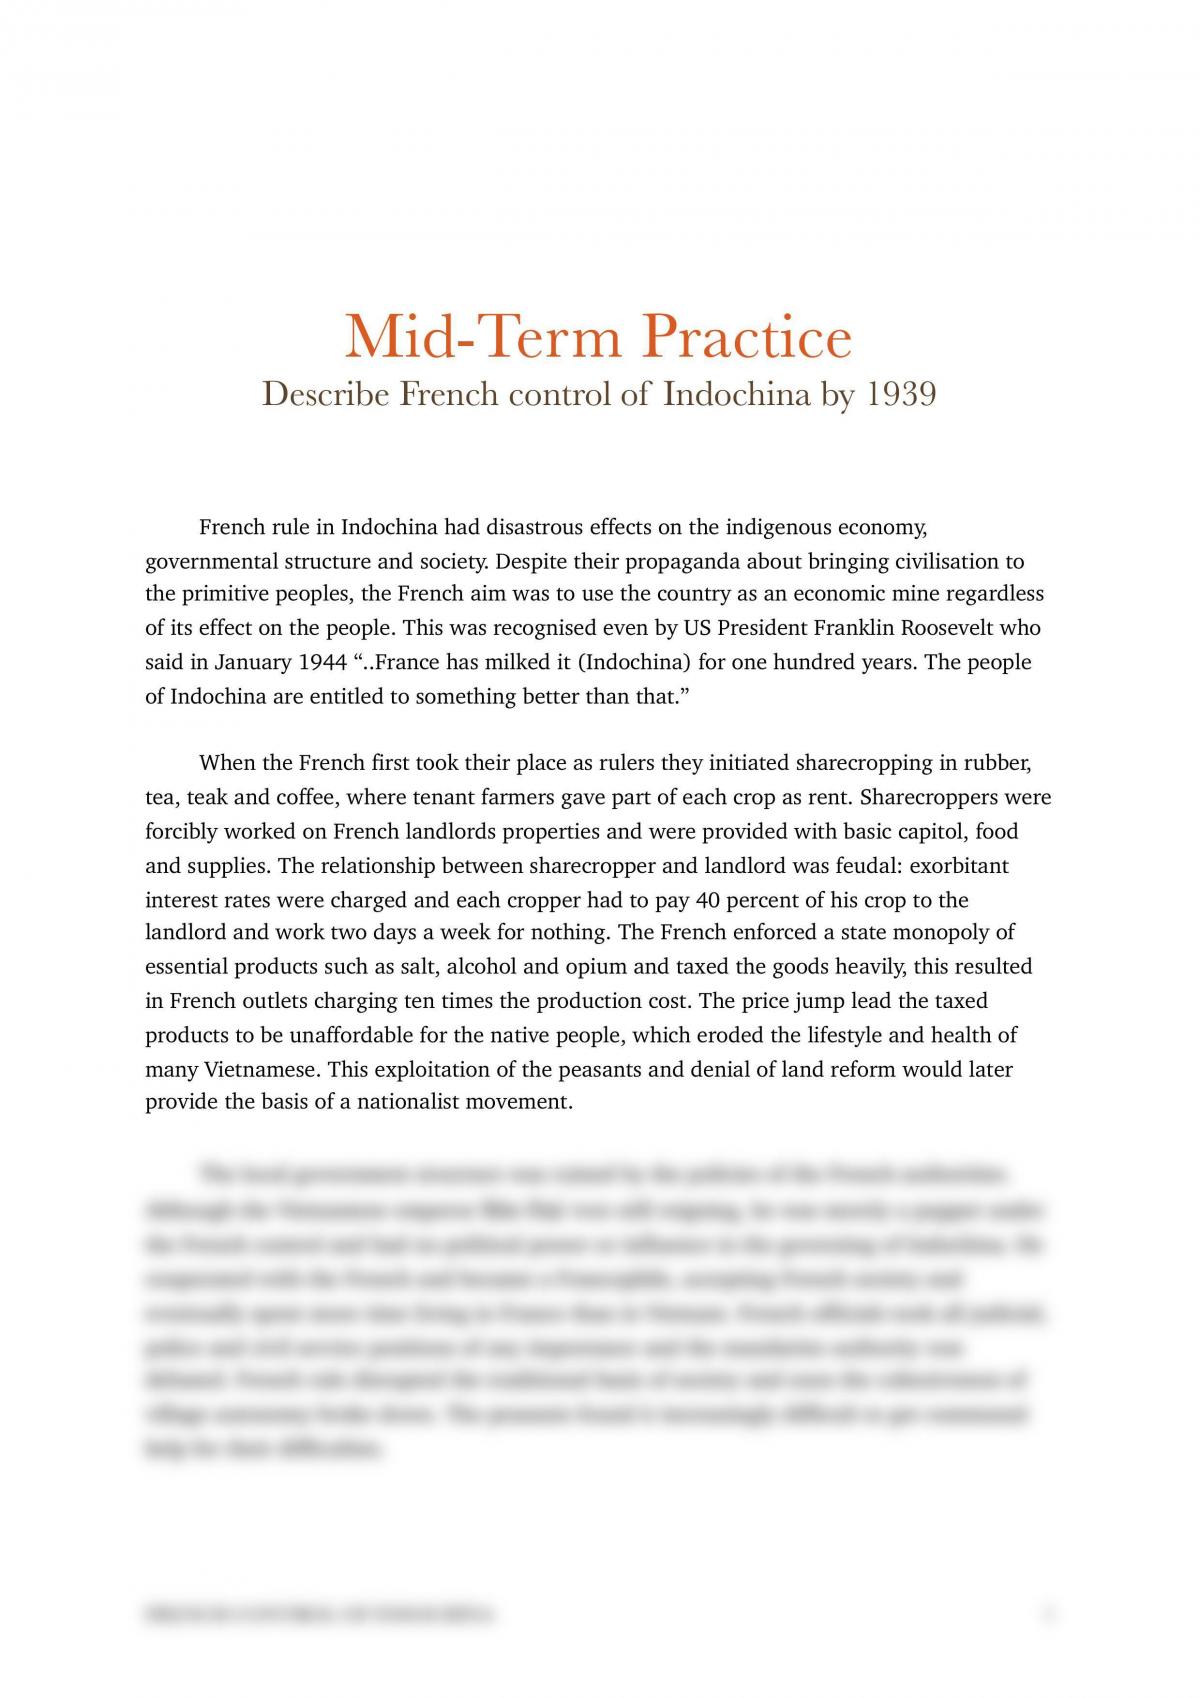 French Control in Indochina - Mid Course Essay  - Page 1